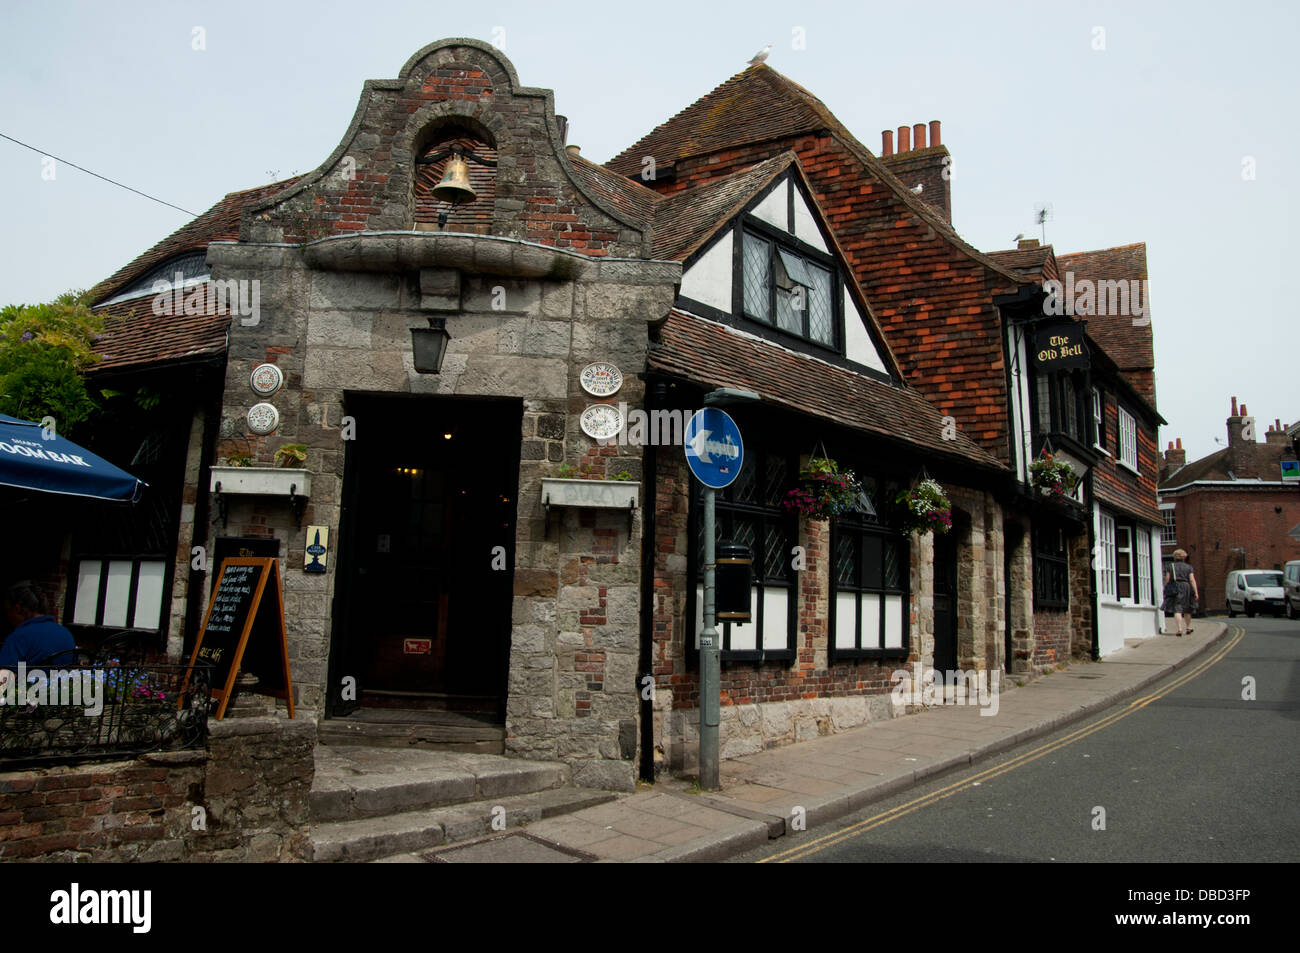 Rye east Sussex coastal cinque port ancient medieval town. Old bell Pub Stock Photo